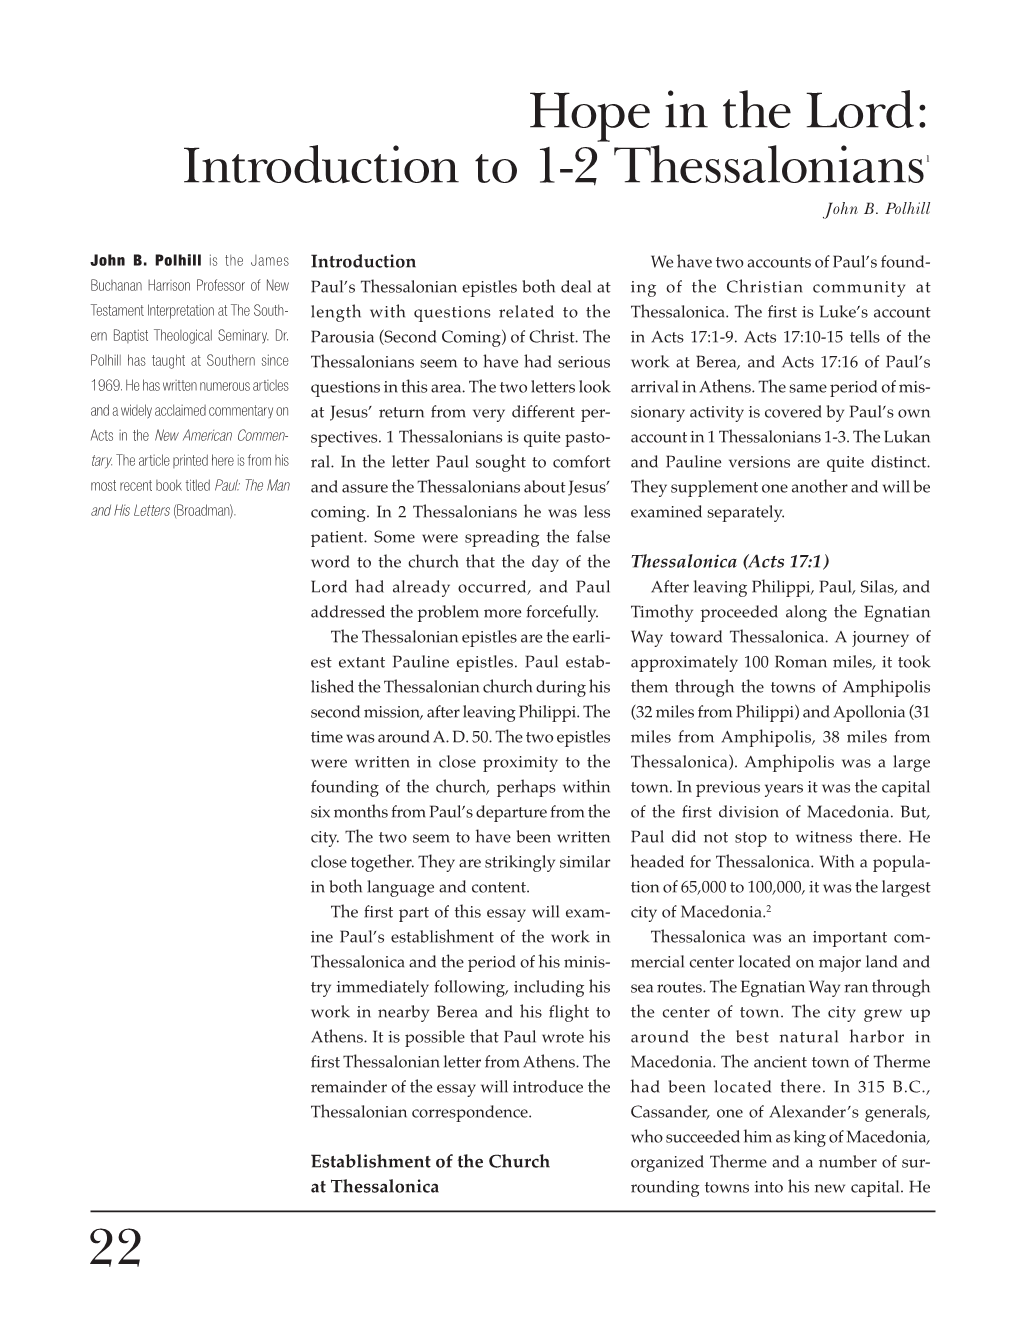 Introduction to 1-2 Thessalonians1 John B